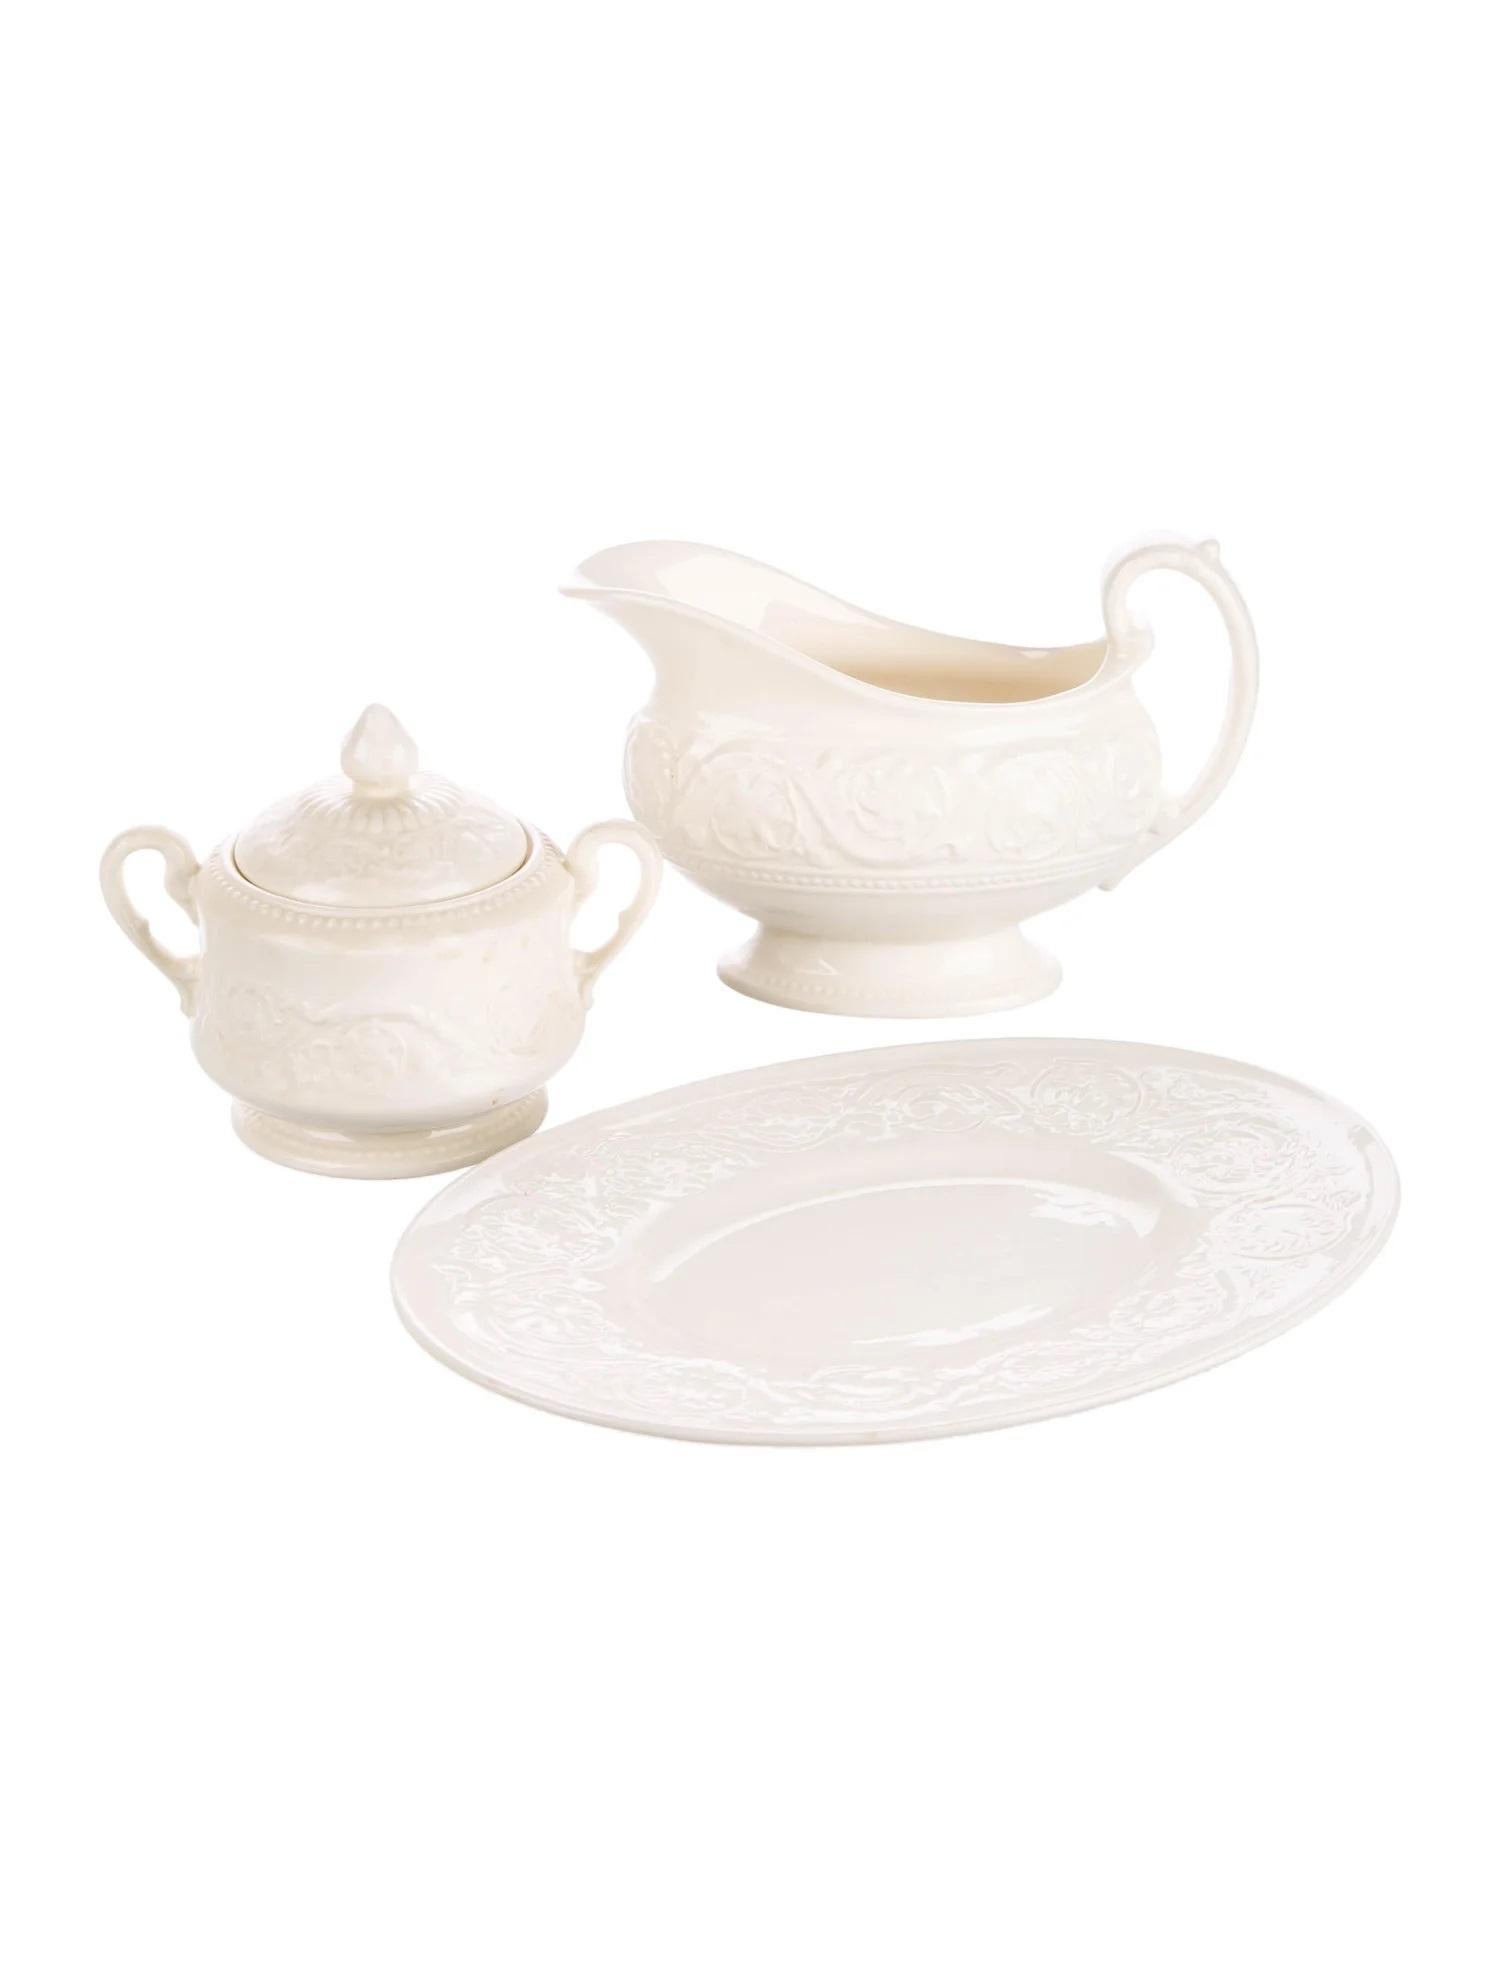 A 24 piece dinnerware set in the wedgwood Patrician pattern.

Features a tonal raised scroll motif throughout and brand stamp at undersides. 

Made in England, circa 1980.. This pattern was originally produced from 1927 to 1986.

Includes the